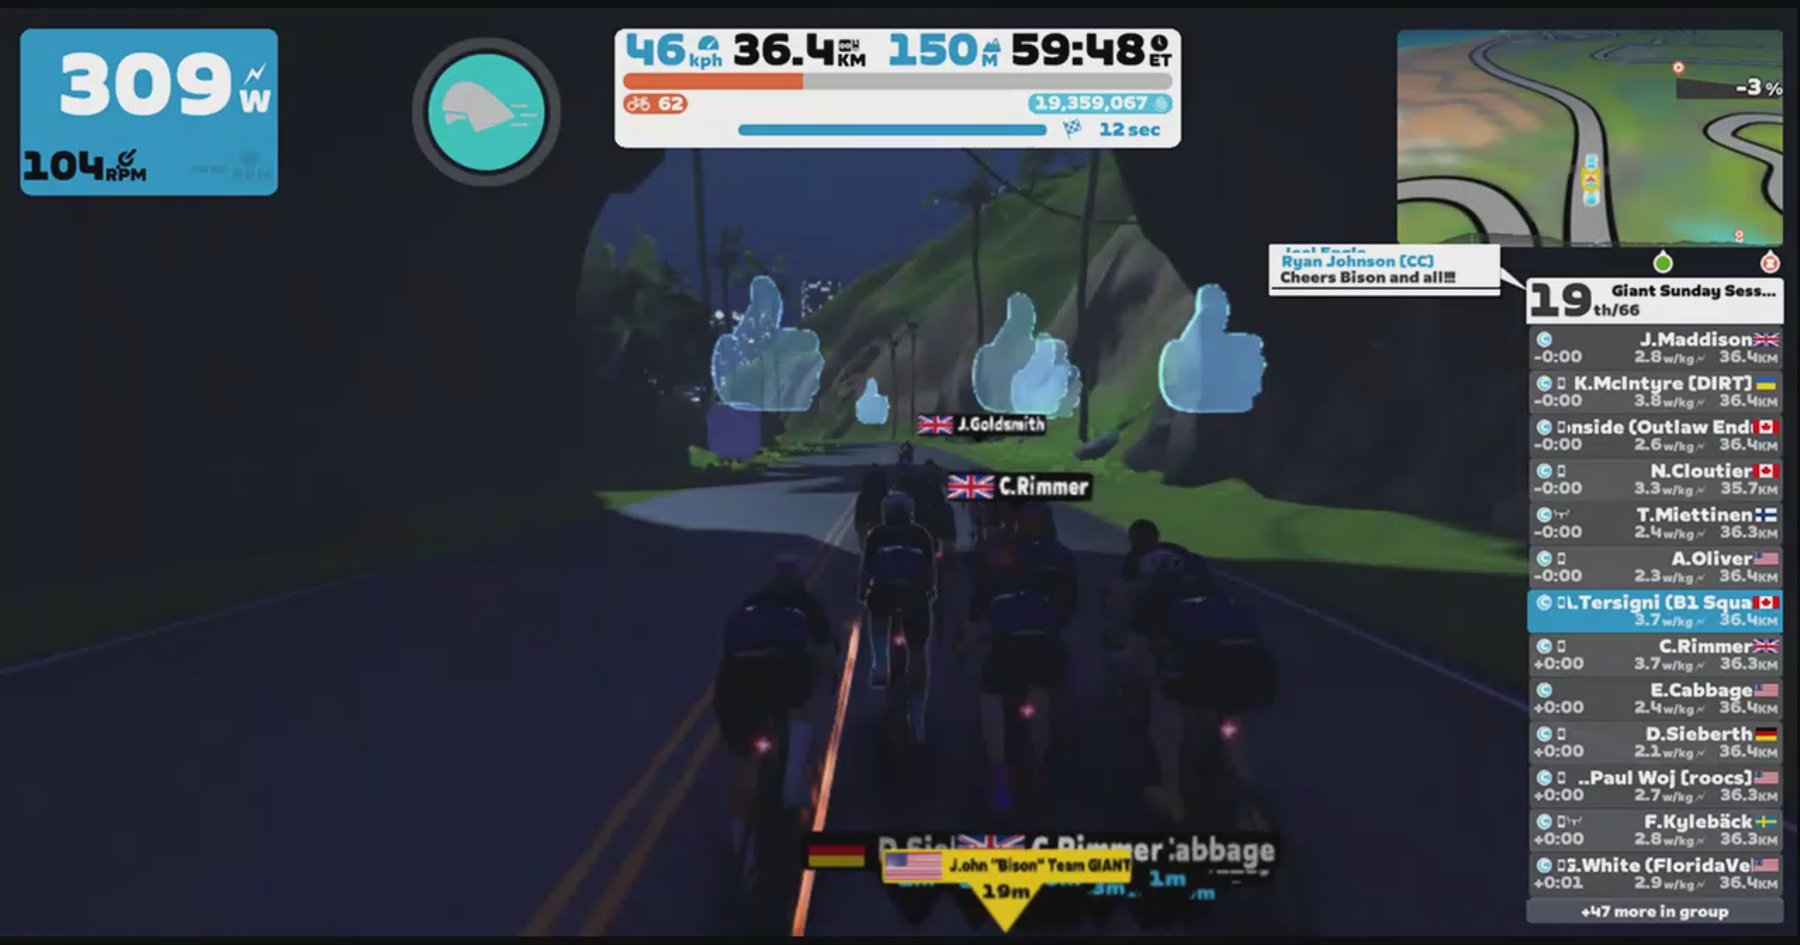 Zwift - Group Ride: Giant Sunday Session Ride Series (C) on Volcano Flat in Watopia